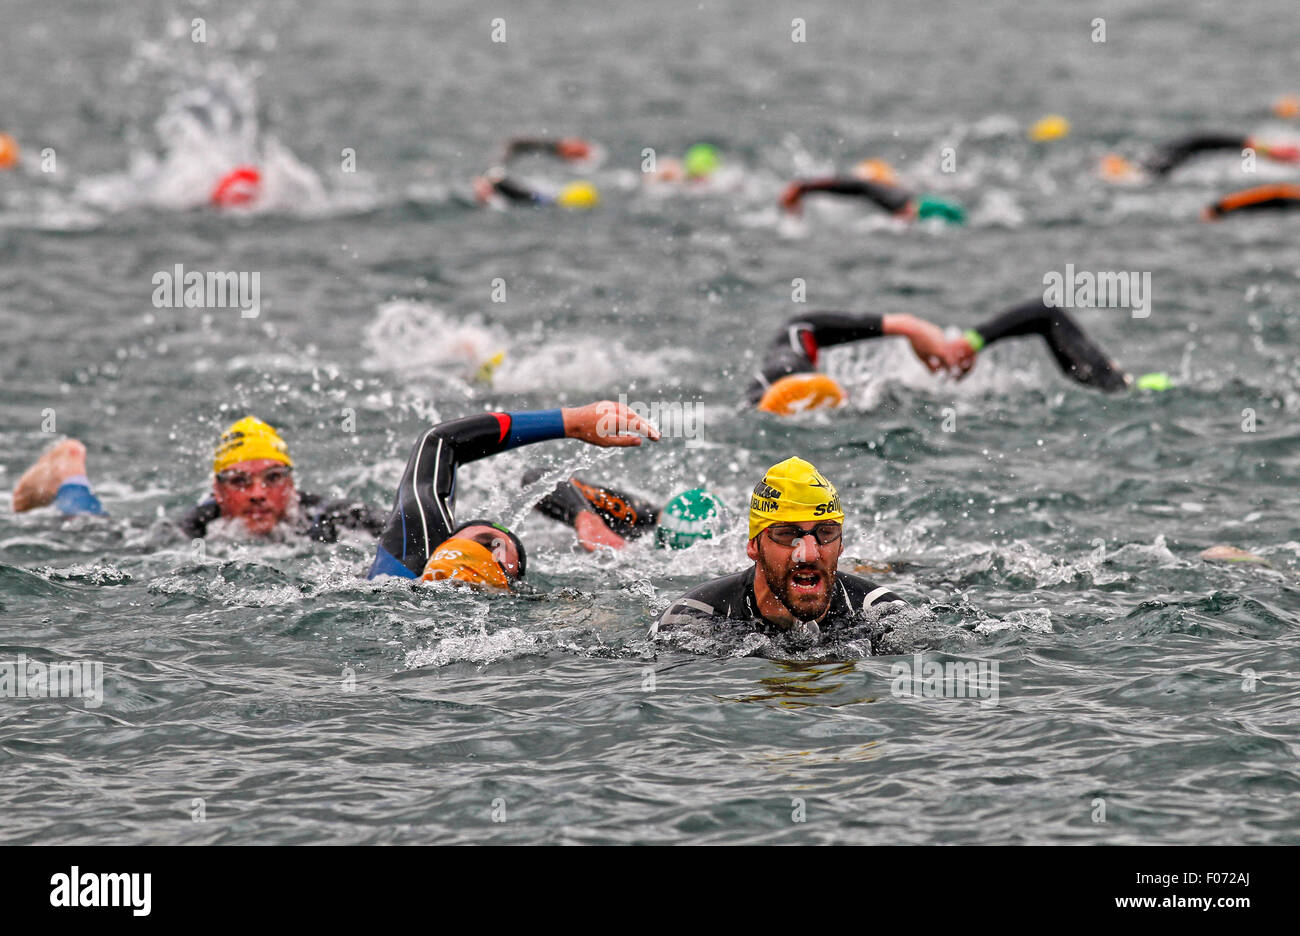 Dublin, Ireland. 09th Aug, 2015. Participants in the Ironman triathlon event in Dublin start the event by swimming 1.9km in Scotsman's Bay, Dun Laoghaire, Dublin, Ireland on 9th August 2015. Around 2500 athletes participated in the event, the first to be held in Dublin. Credit:  Glyn Thomas Photography/Alamy Live News Stock Photo